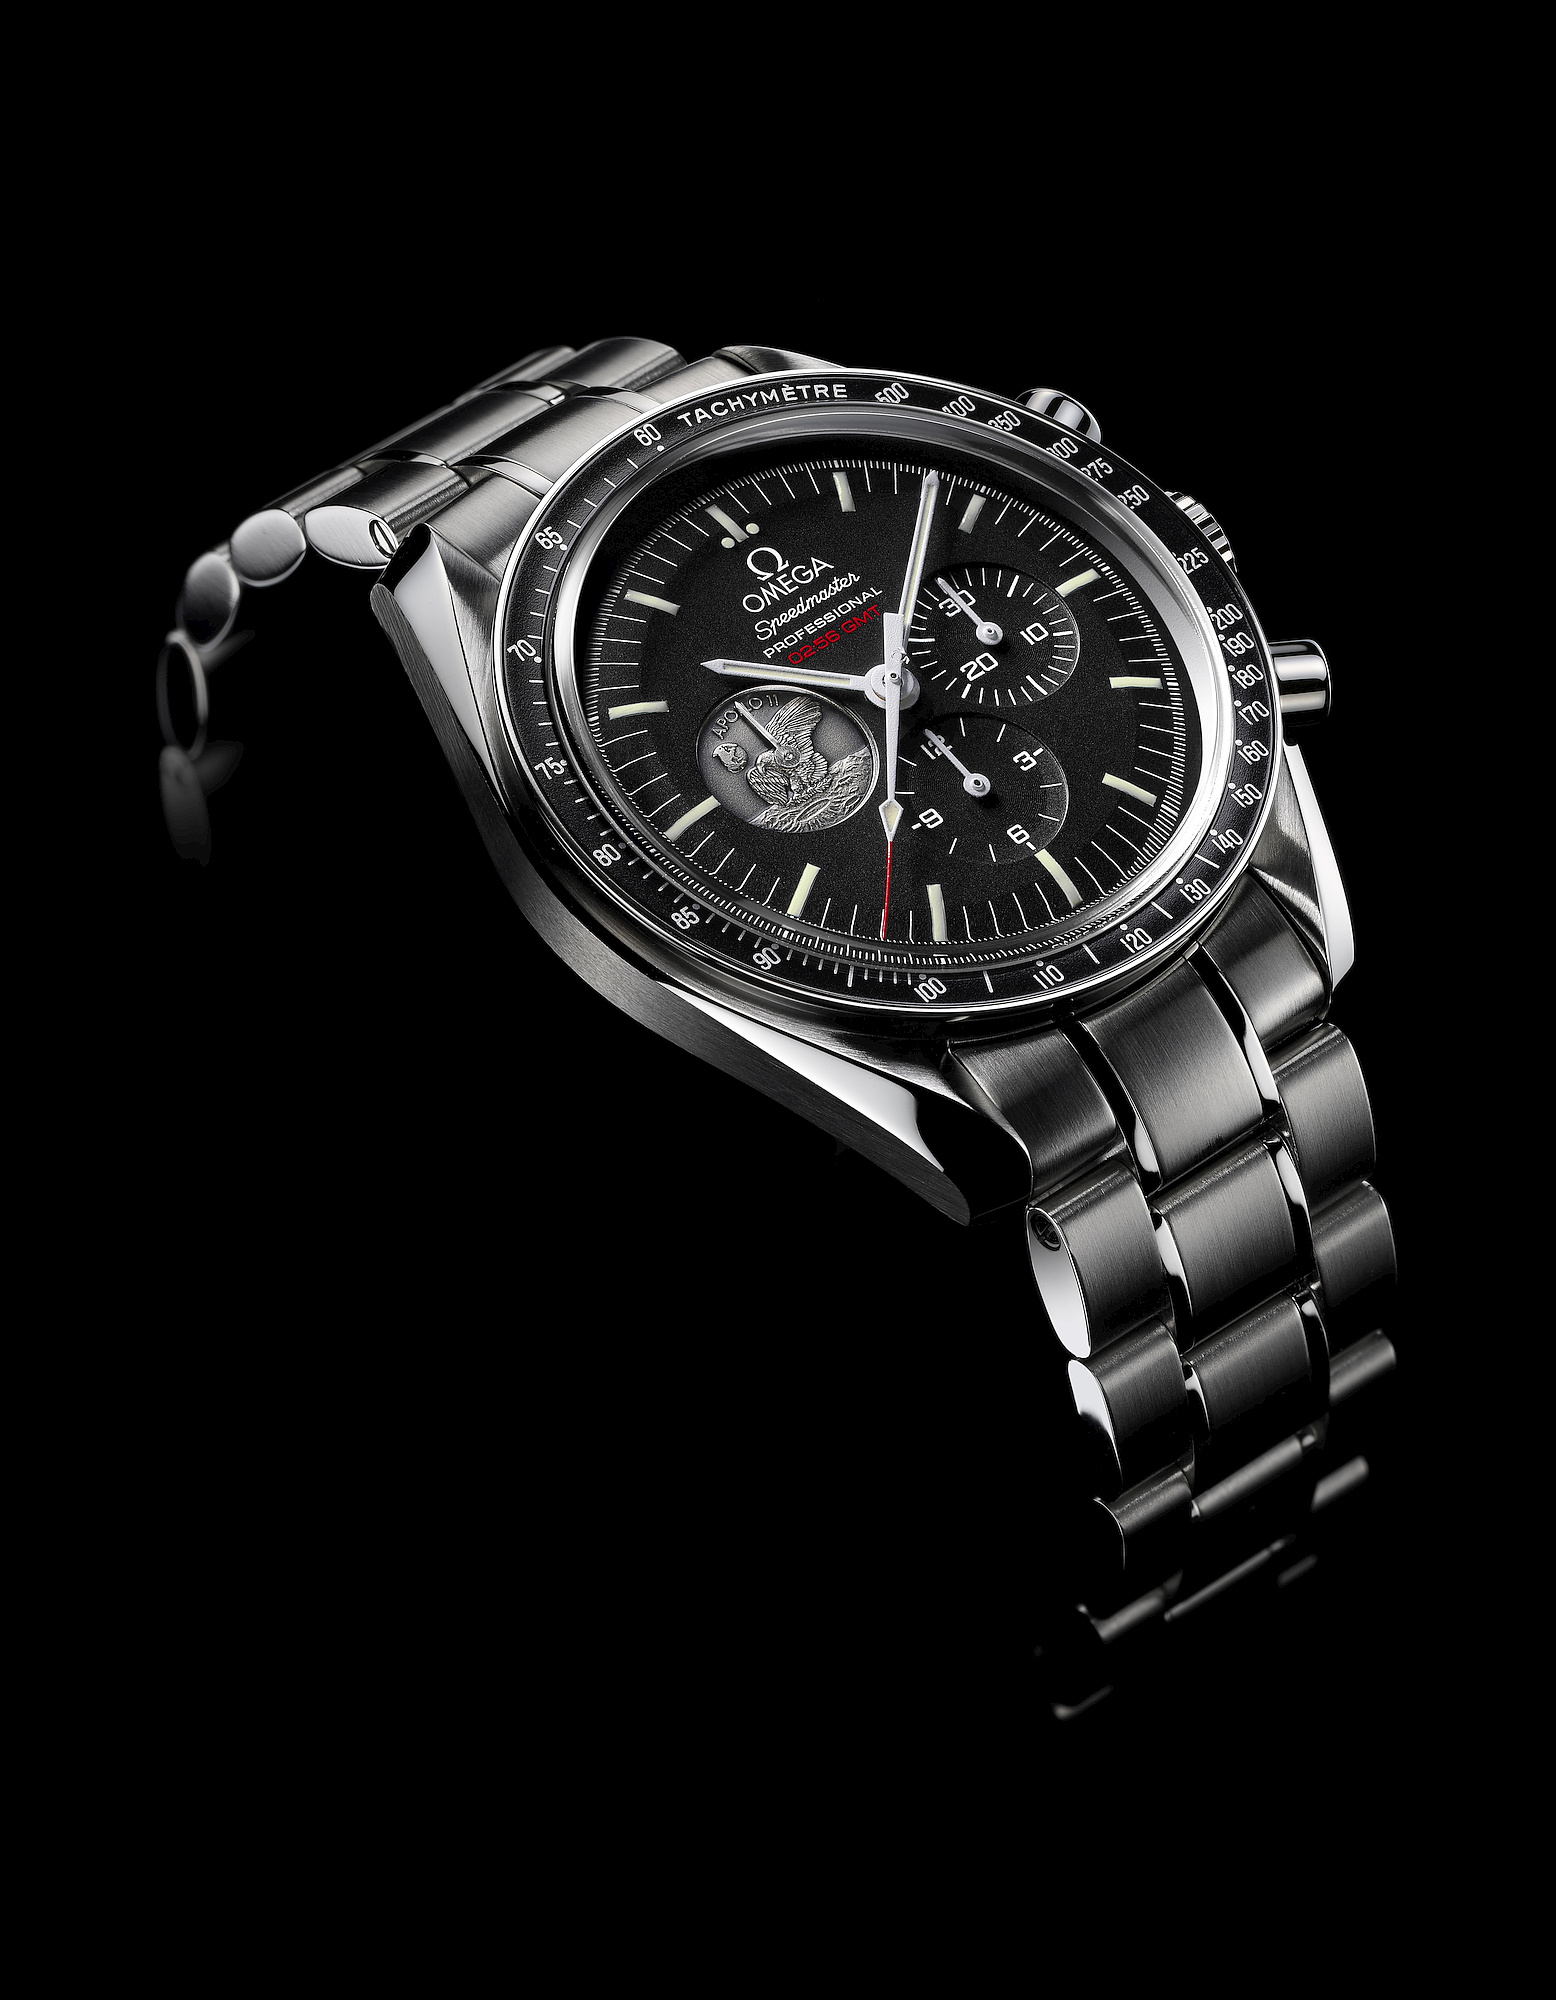 omega speedmaster moonwatch 40th anniversary limited edition